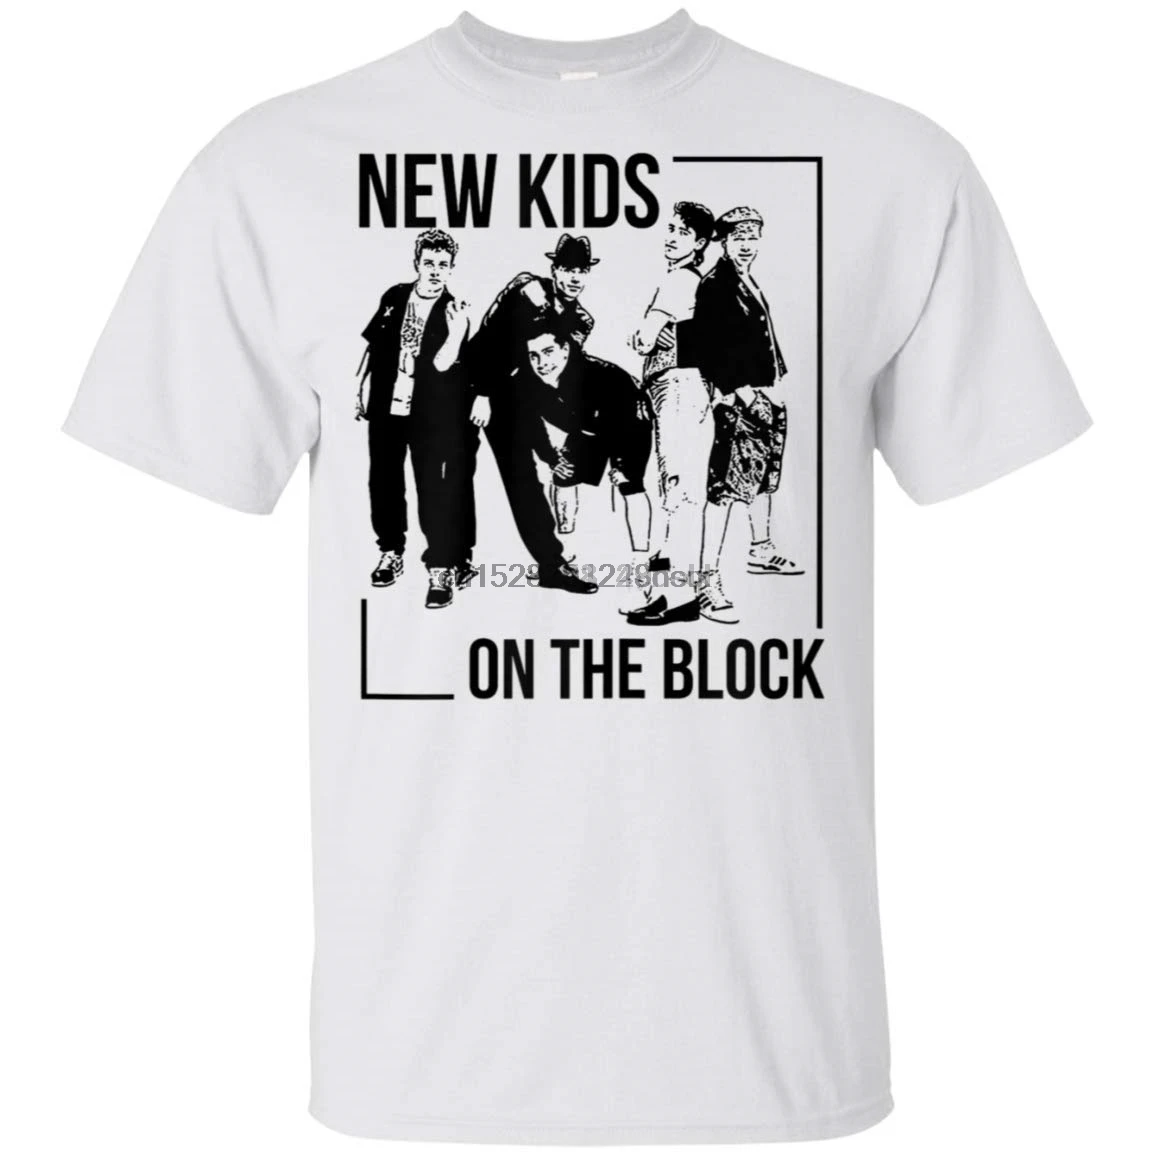 

New Kids On The Blocks Vintage Gift T Shirt for Men Up to 5XL - Great Idea for Fans Who Love NKOTB